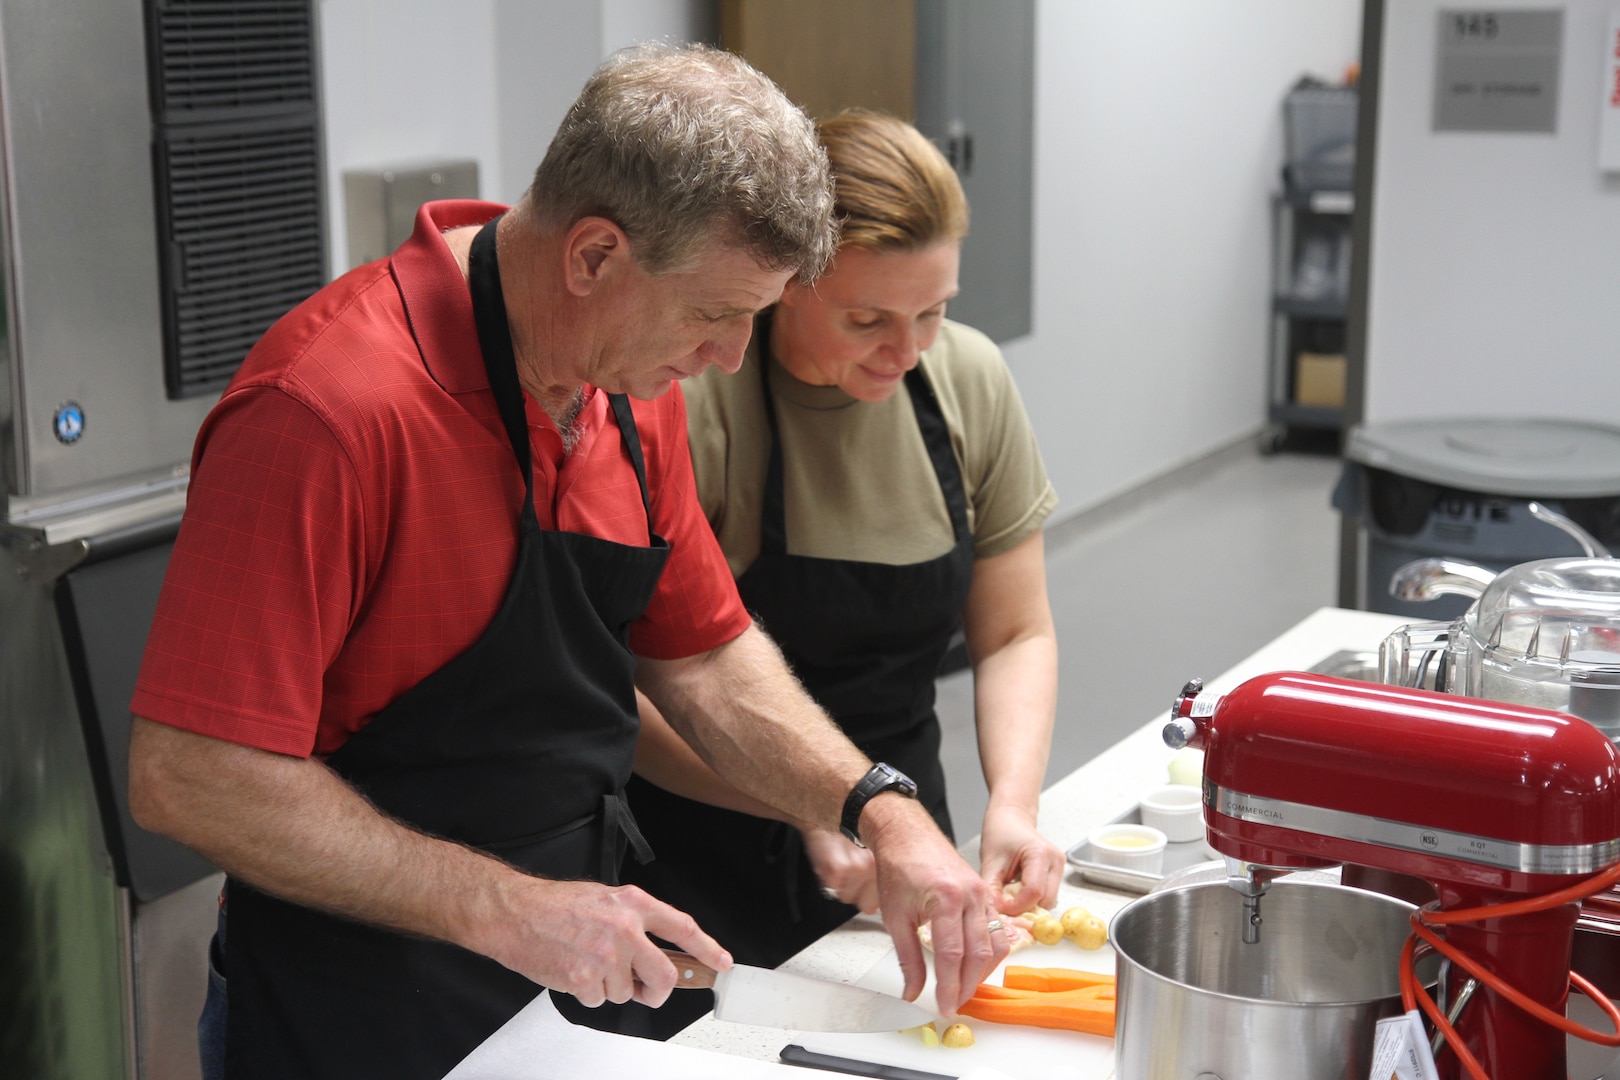 Lt. Col. Christine Edwards (right), an Army dietician, prepares food alongside of her husband, David Abraham, during a marriage enrichment class at the Vogel Resiliency’s teaching kitchen Feb. 23  at Joint Base San Antonio-Fort Sam Houston.